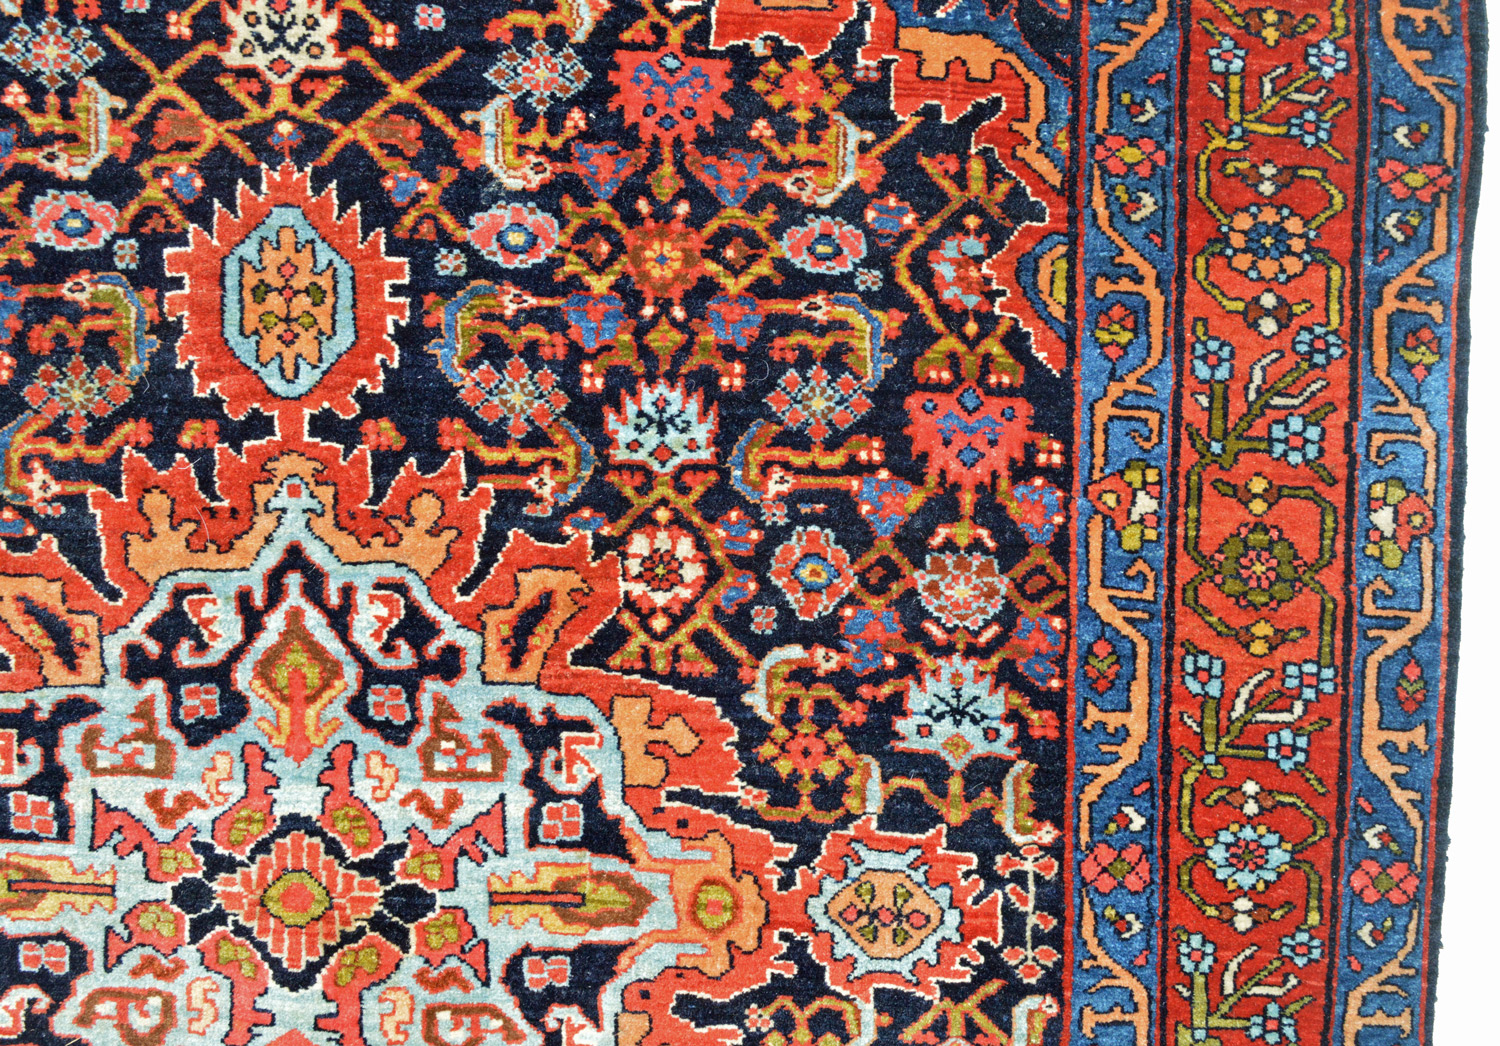 Detail of the sky blue and red medallion on a navy blue "Herati" design field from an antique Persian Bidjar rug. A red border with a scrolling vine and flower design and mid blue guard borders frame the field - Douglas Stock Gallery, antique Oriental rugs Boston,MA area